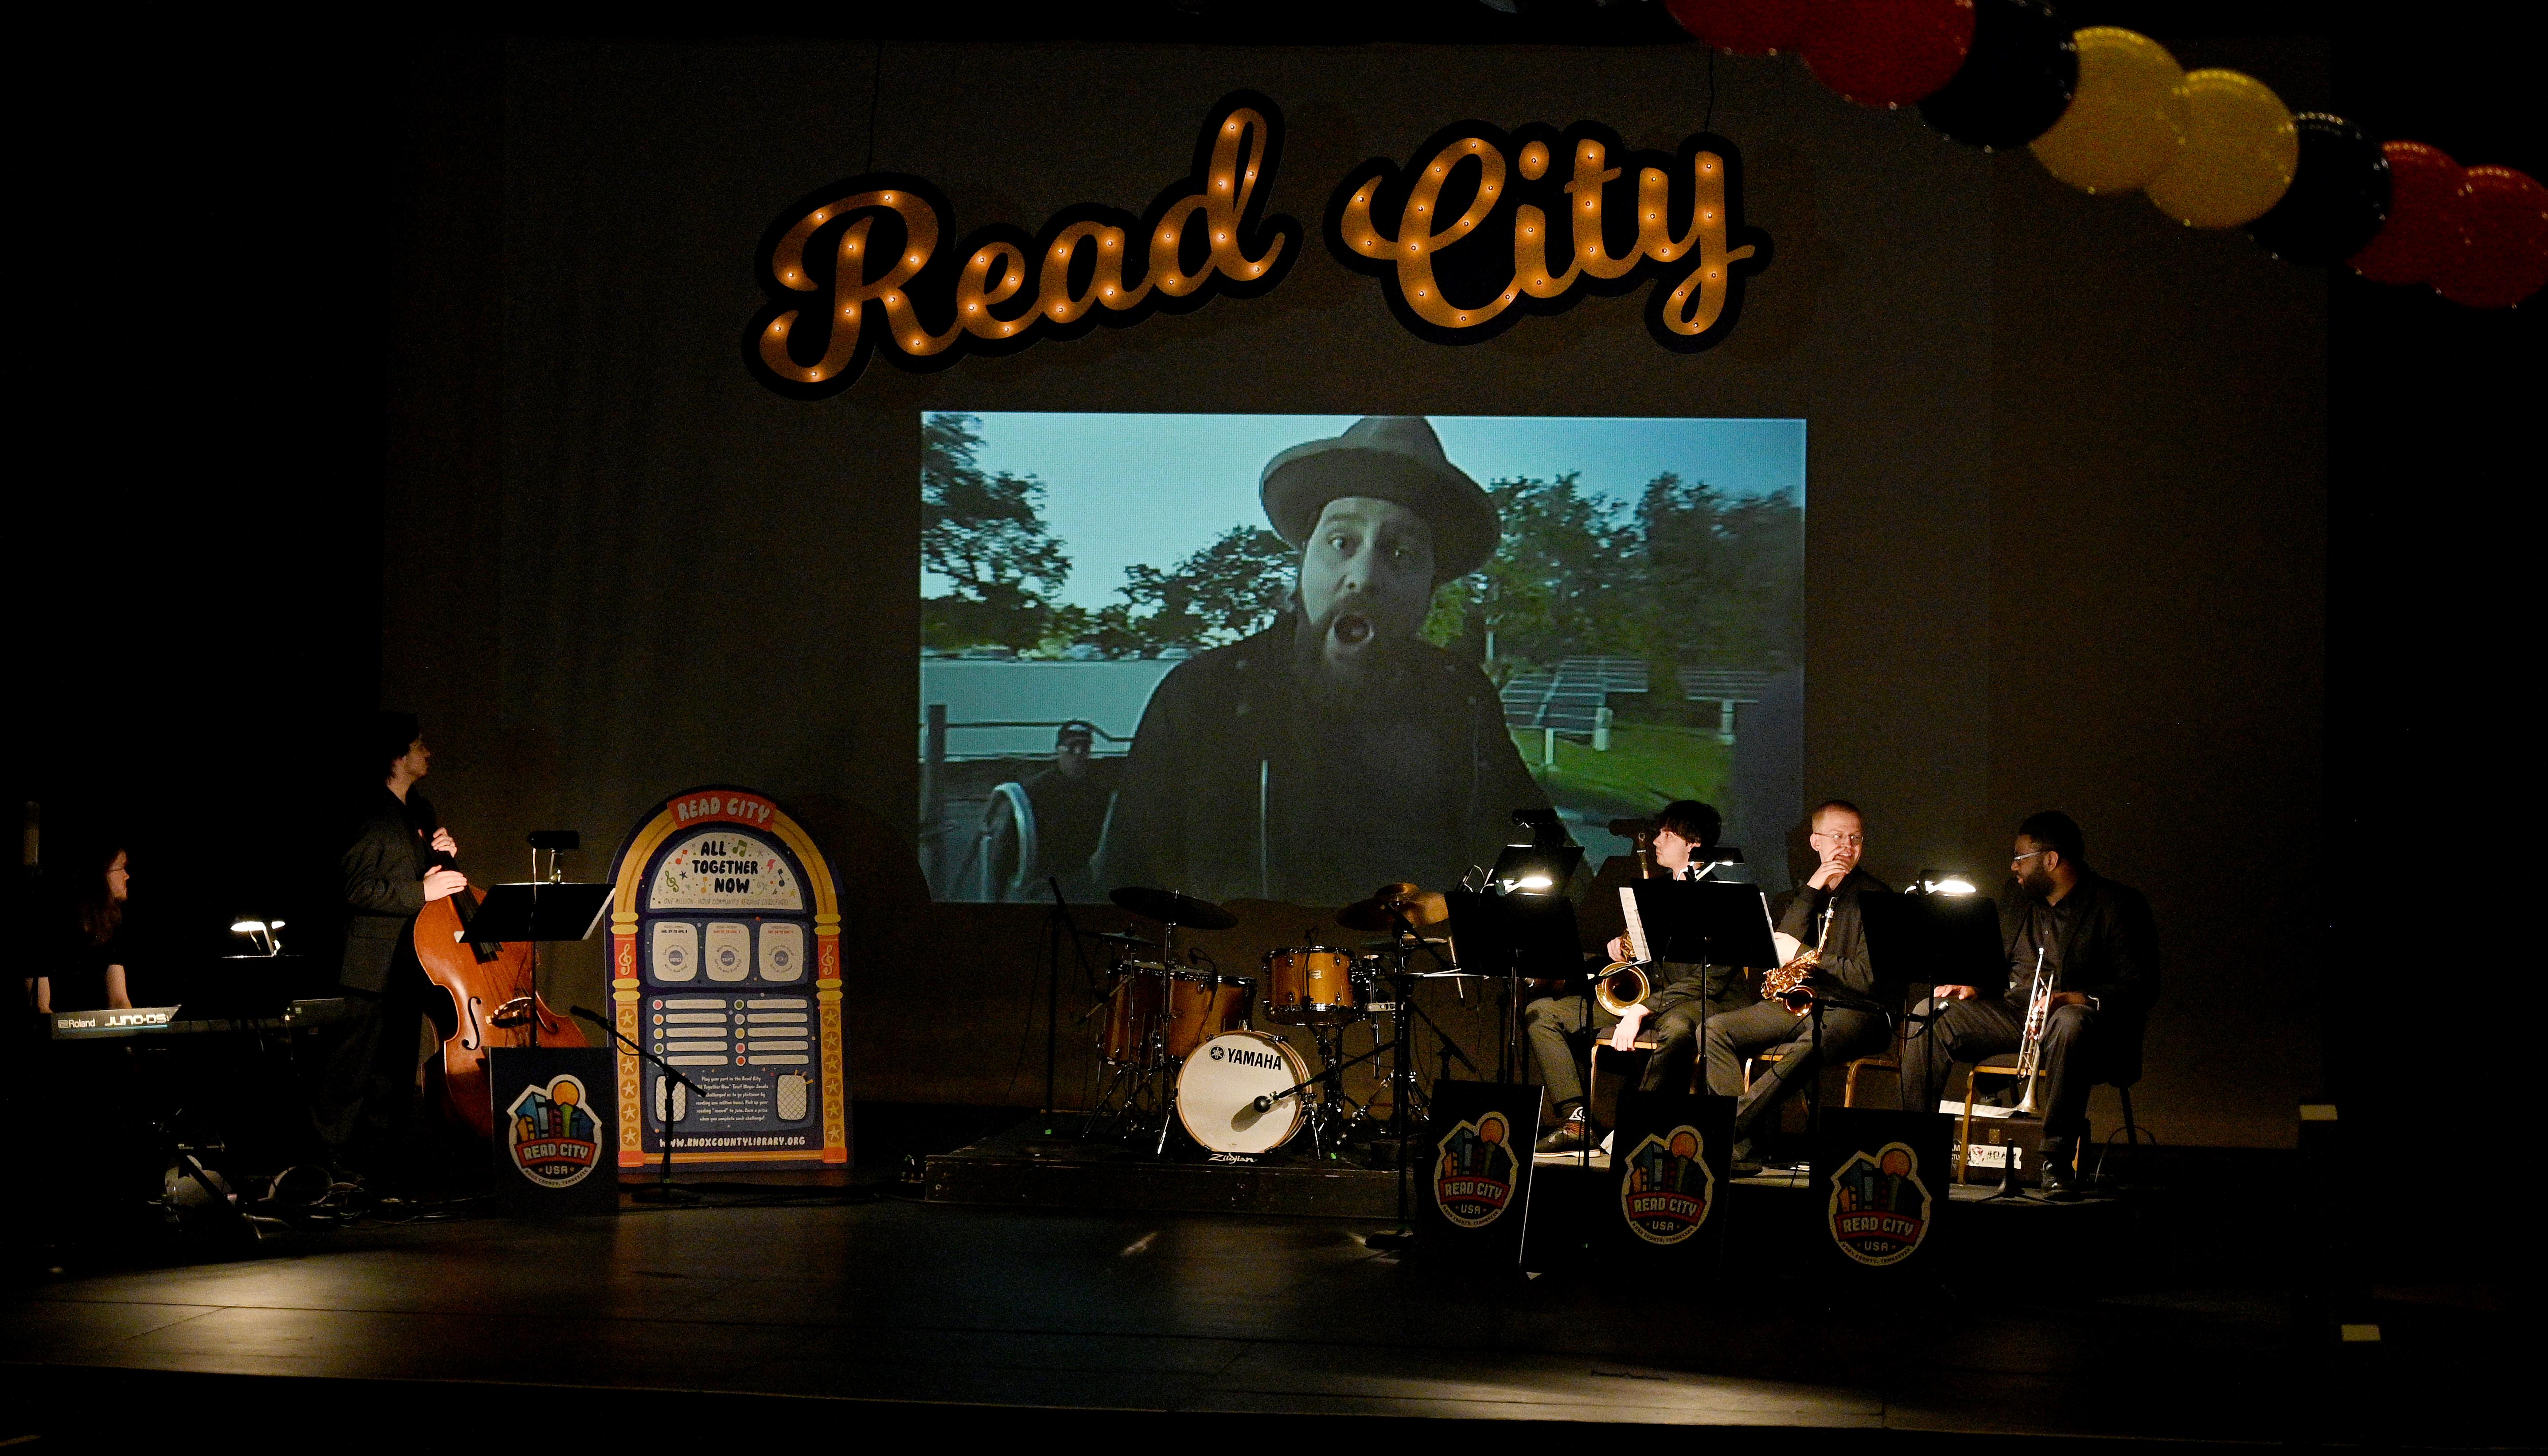 a stage with a small band, Read City in marquee letters, and a video screen showing an image of Coy Bowles